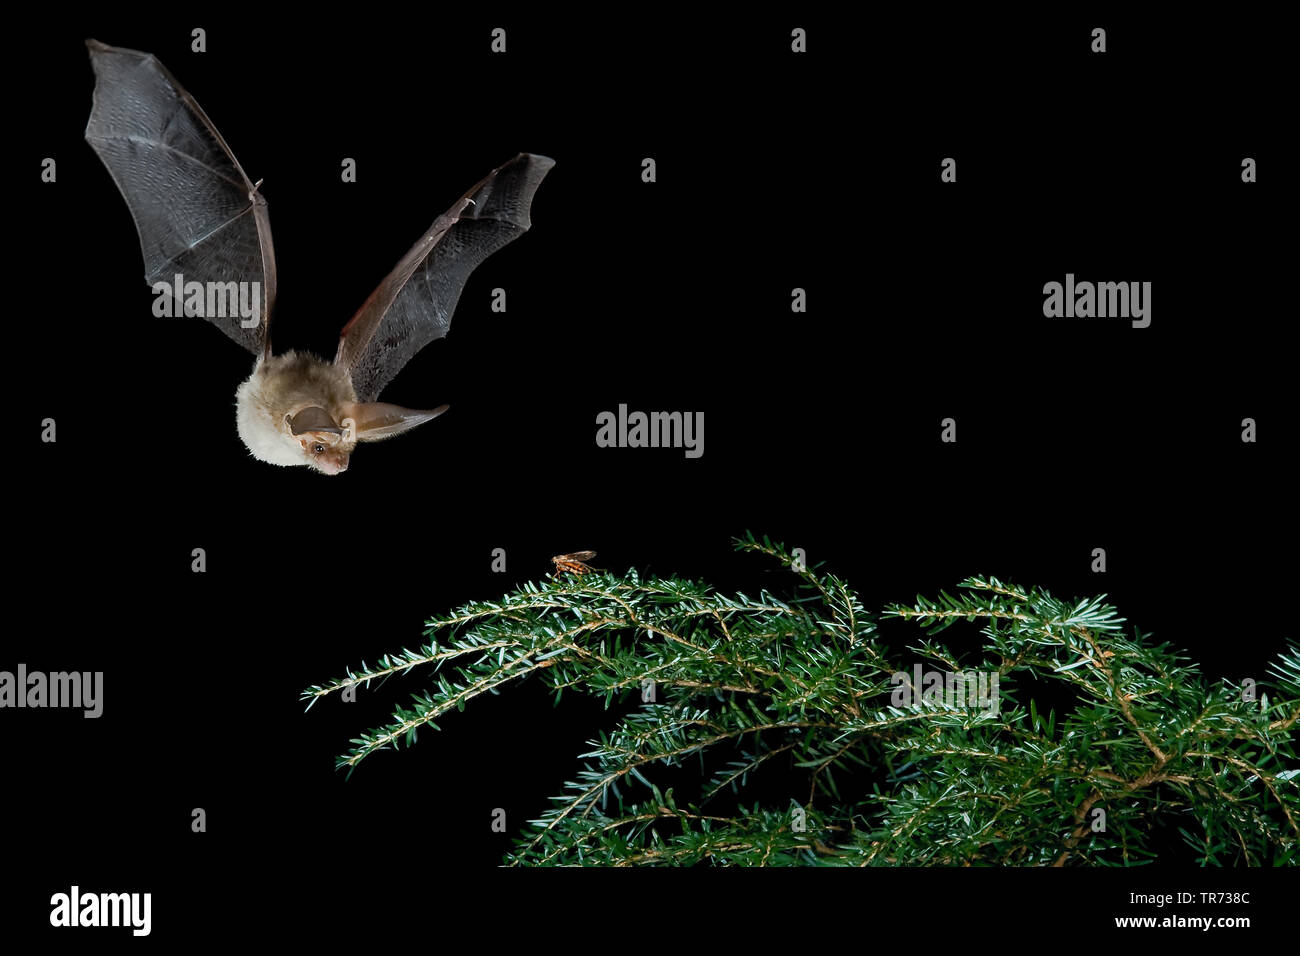 Bechstein's bat (Myotis bechsteinii), flying at night, aiming at insect, Belgium Stock Photo